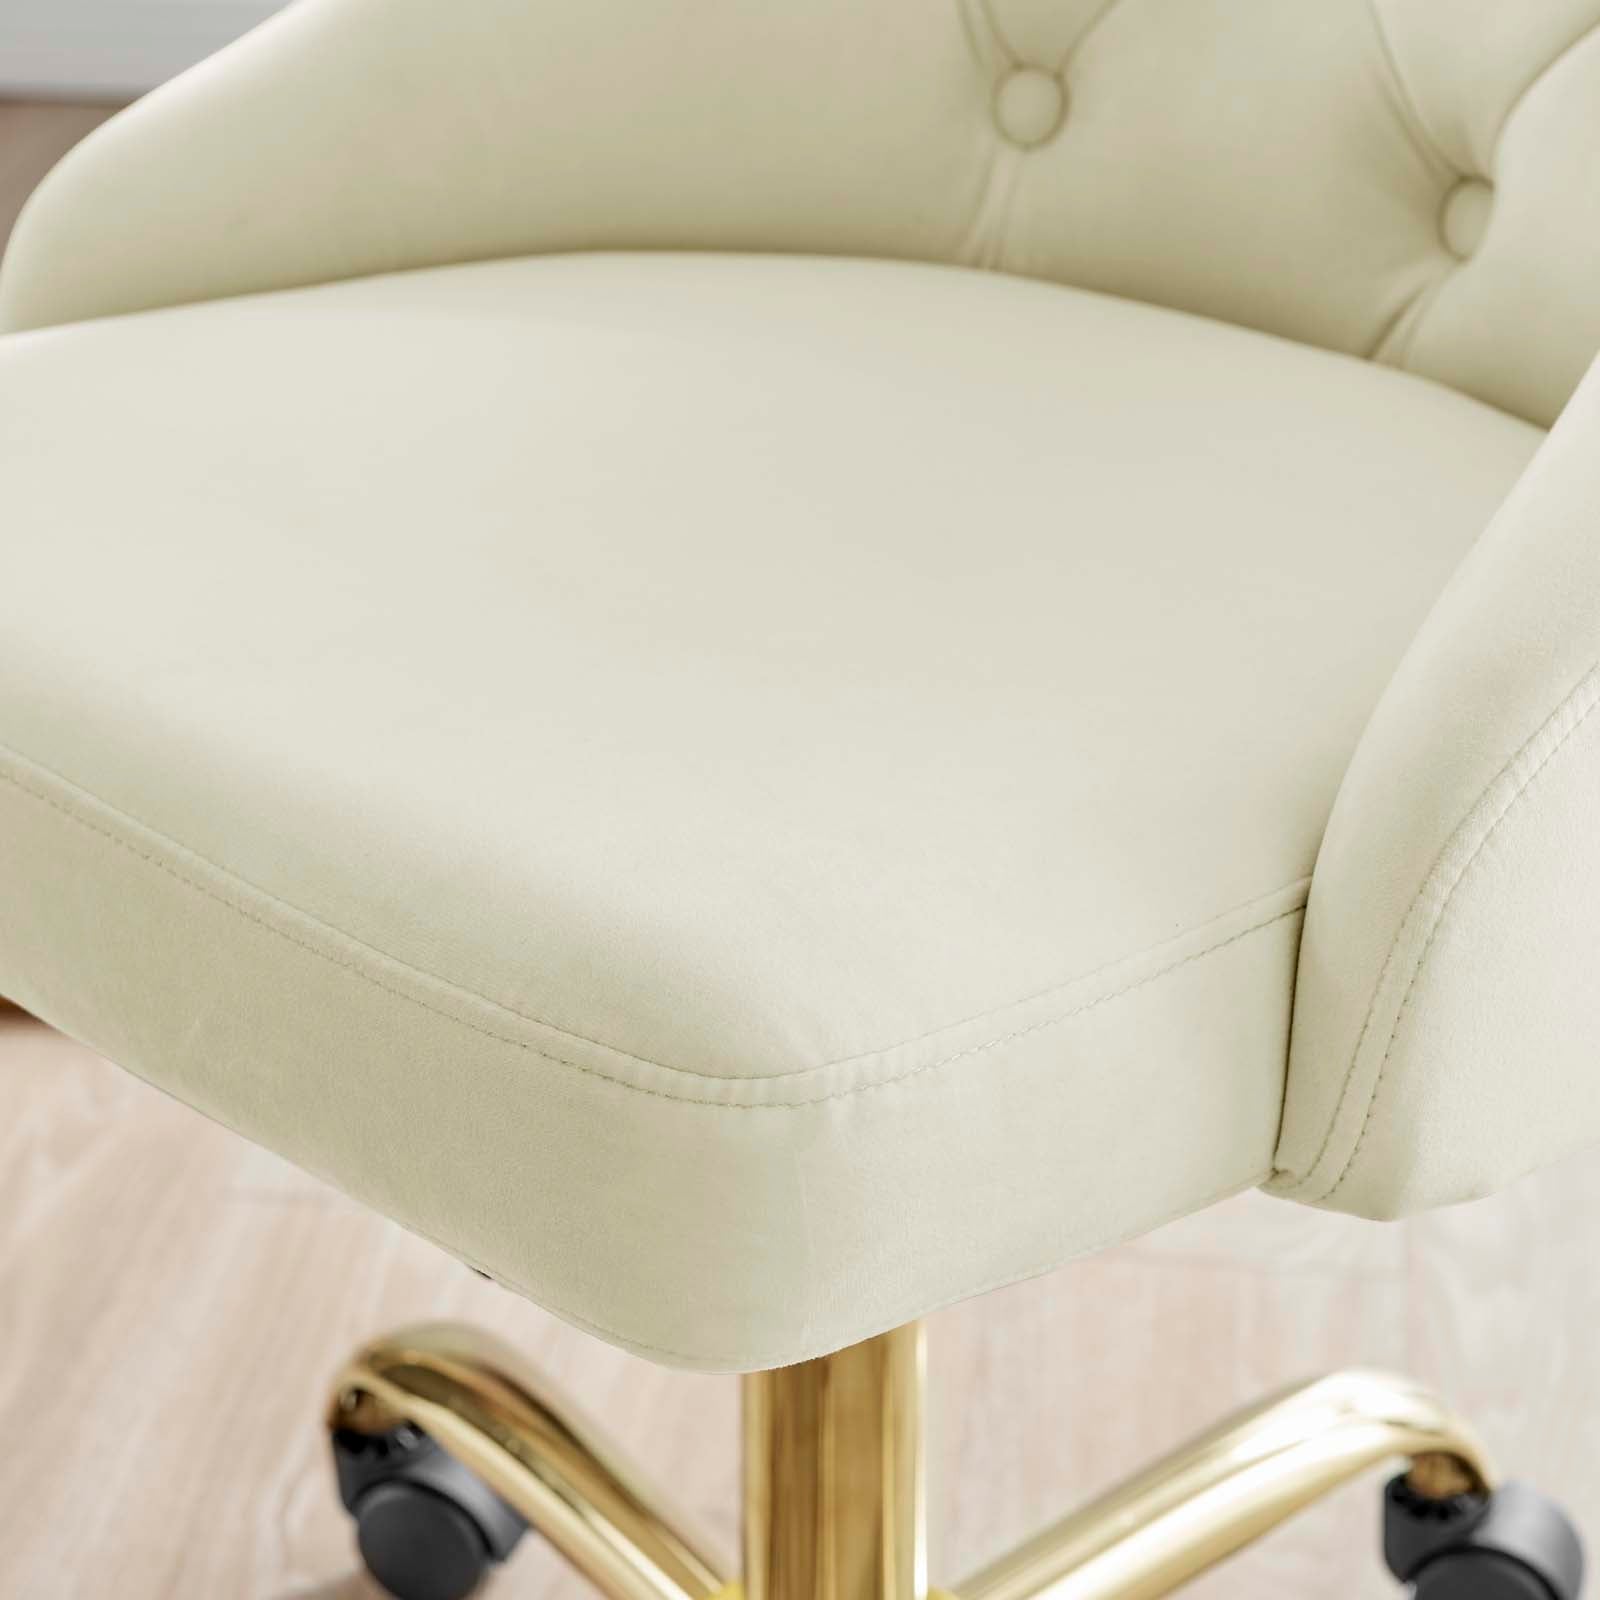 Loft Tufted Office Chair Gold